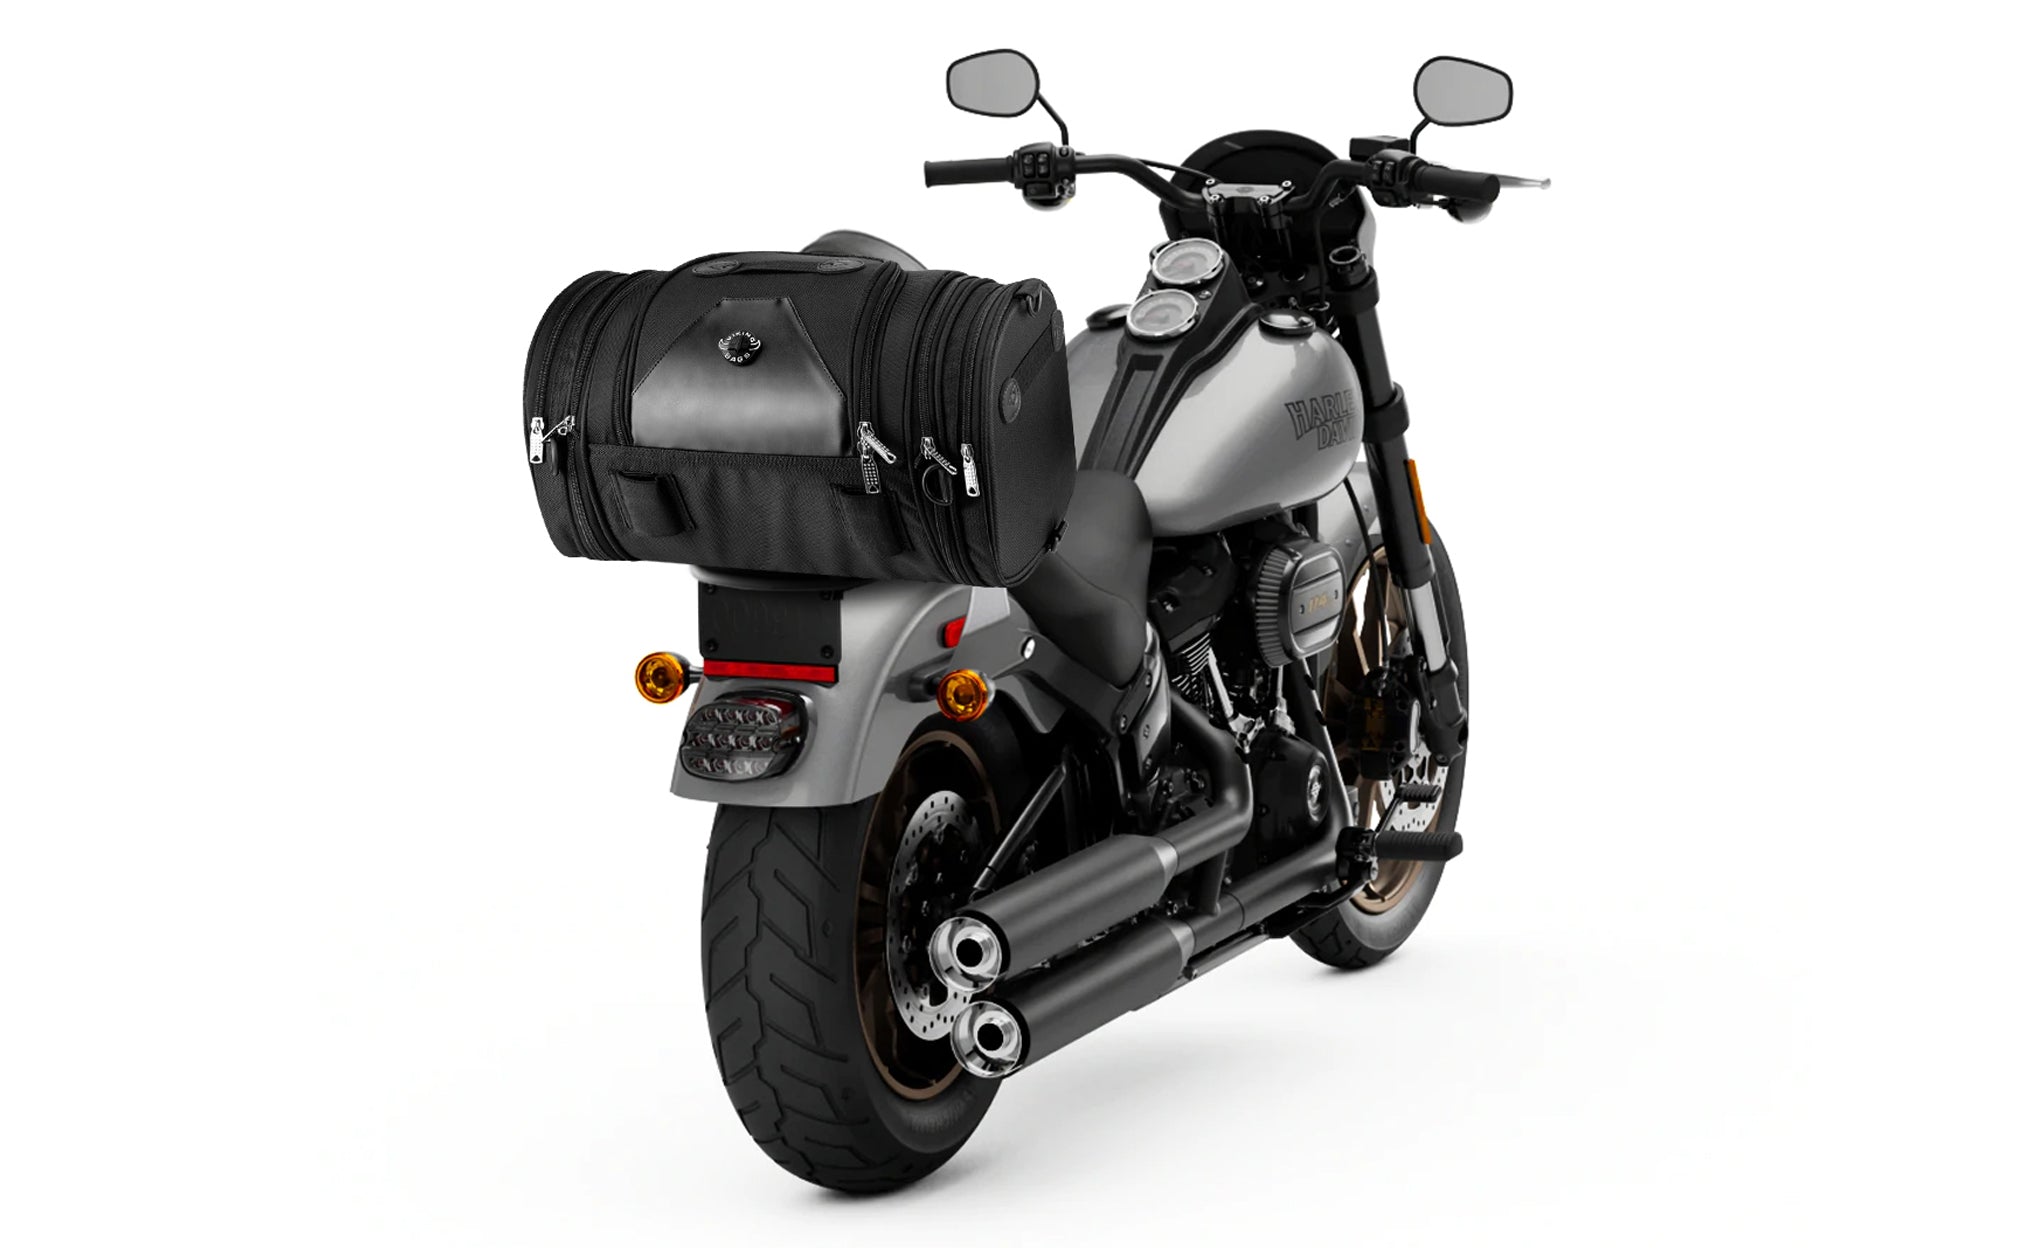 Viking Axwell Small Hysoung Motorcycle Tail Bag Bag on Bike View @expand